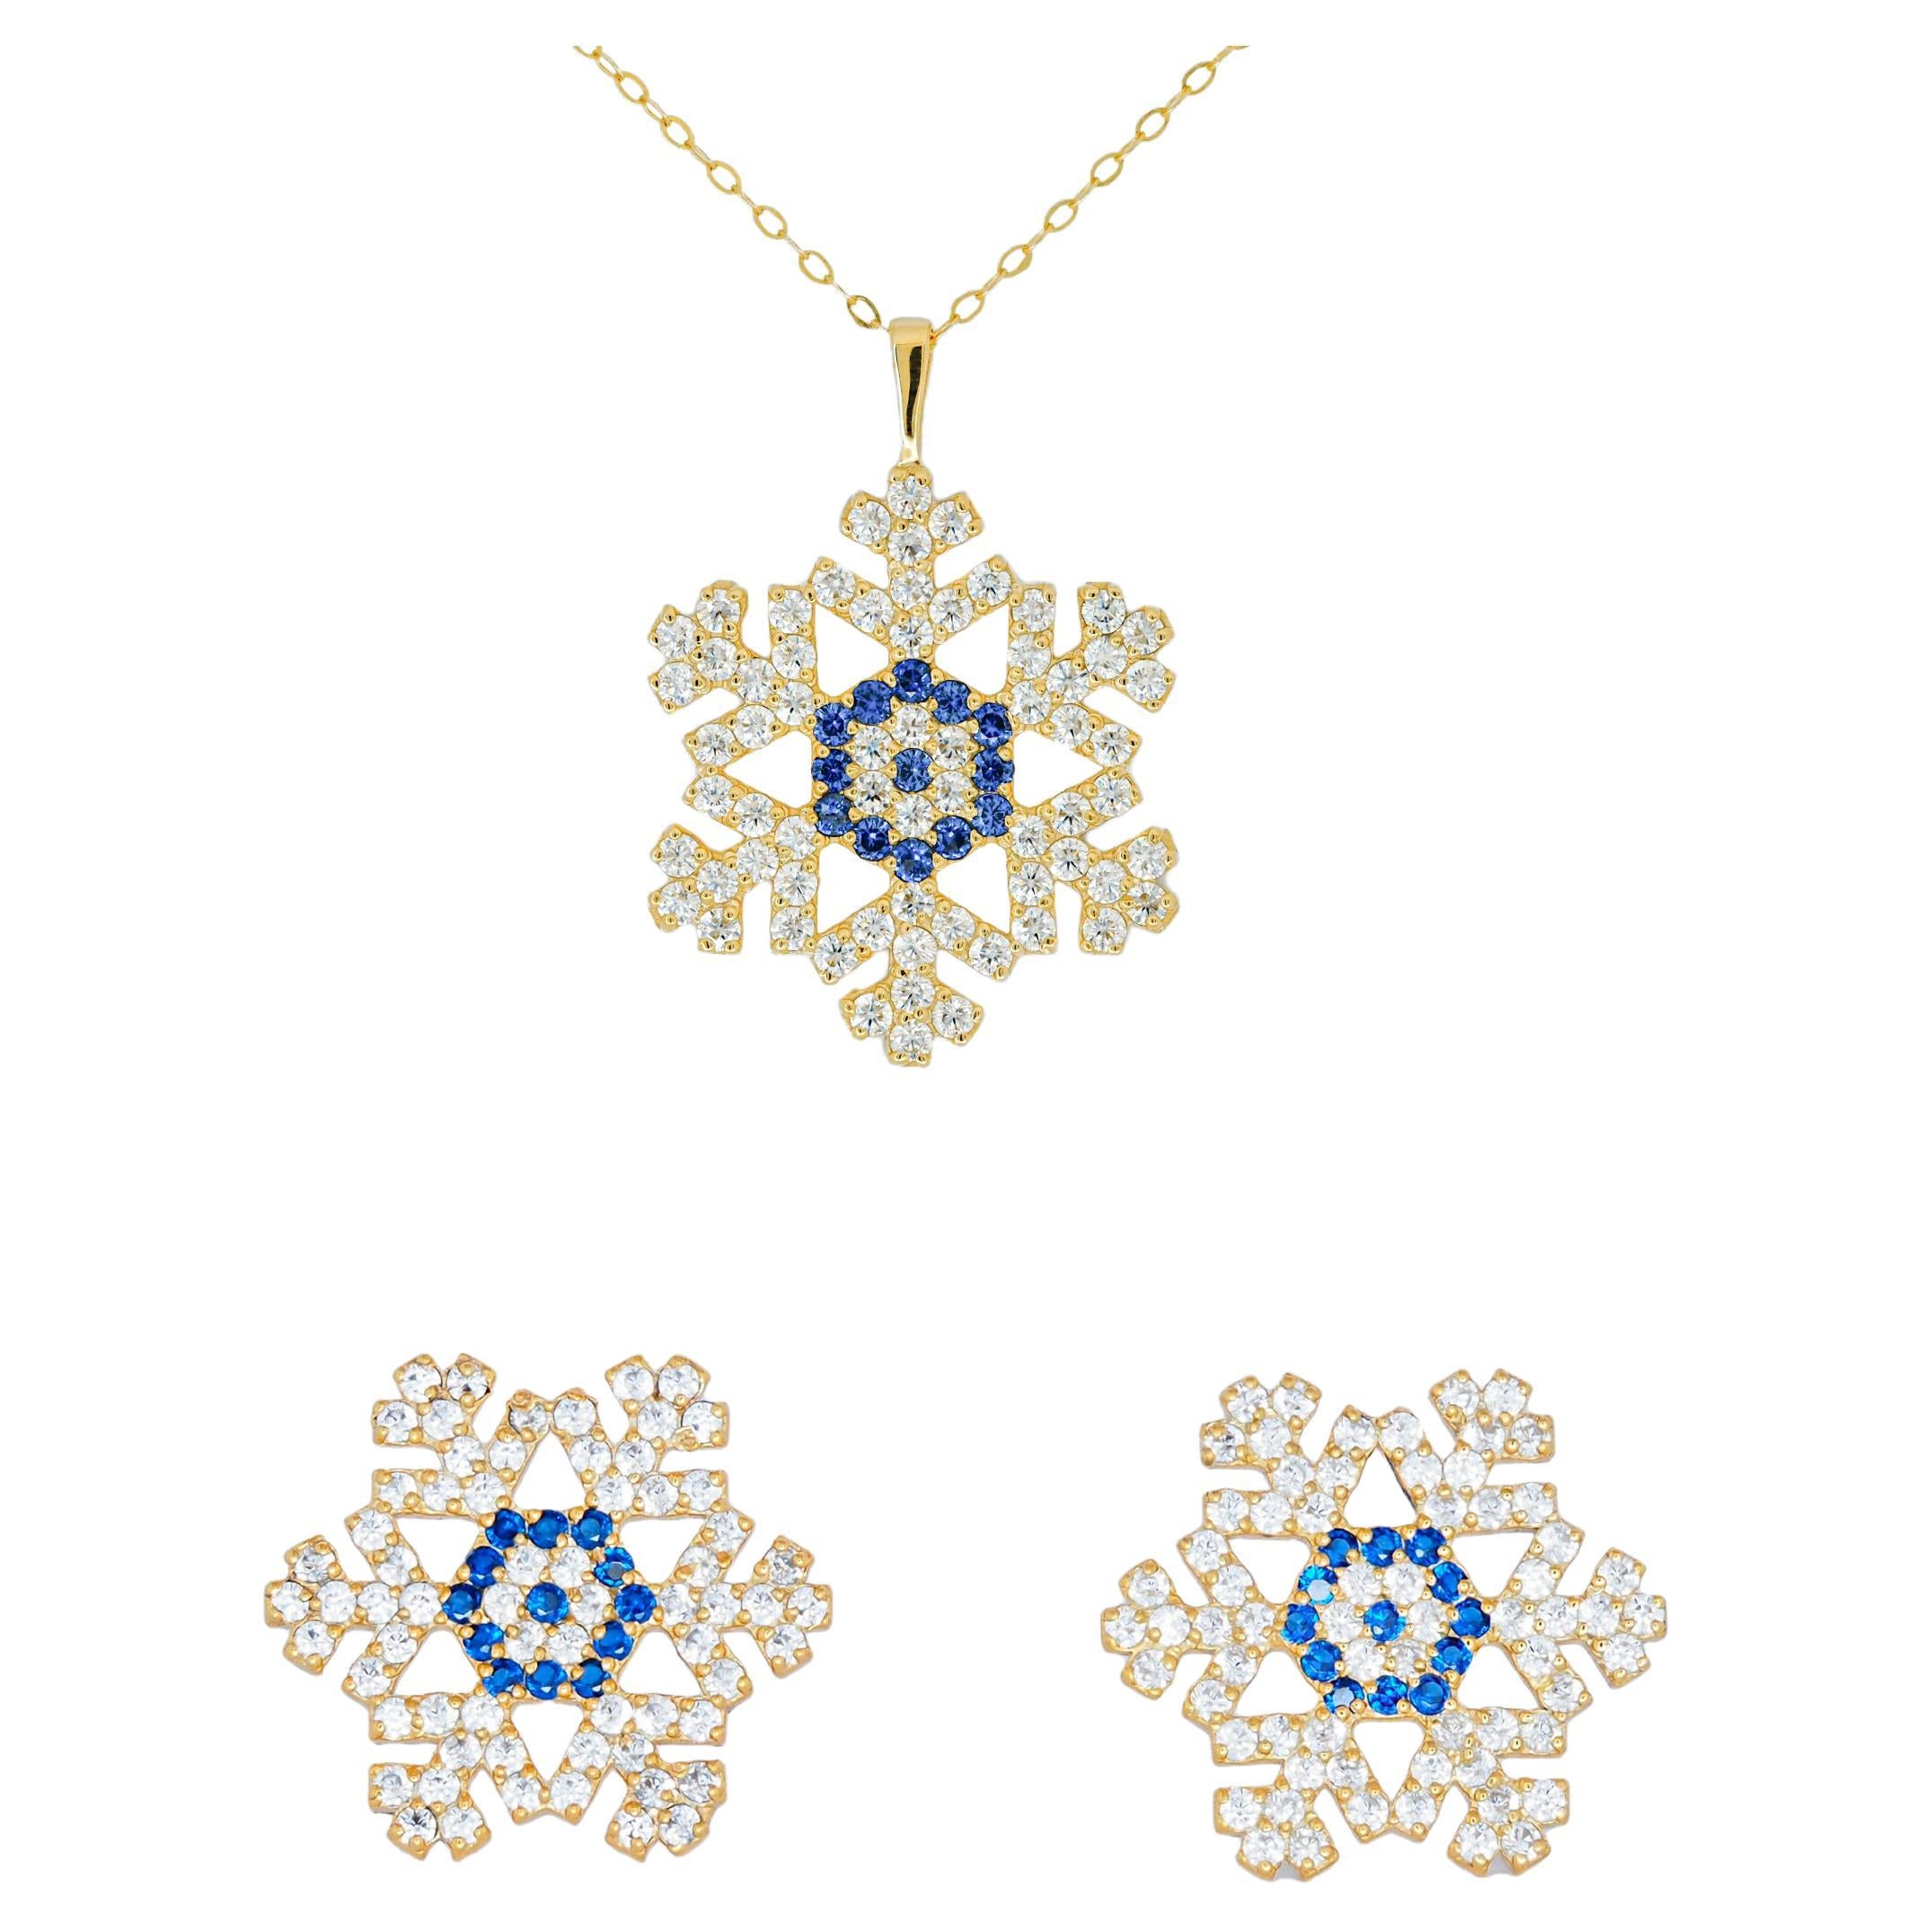 Snowflake set: earrings and pendant necklace in 14k solid gold.  